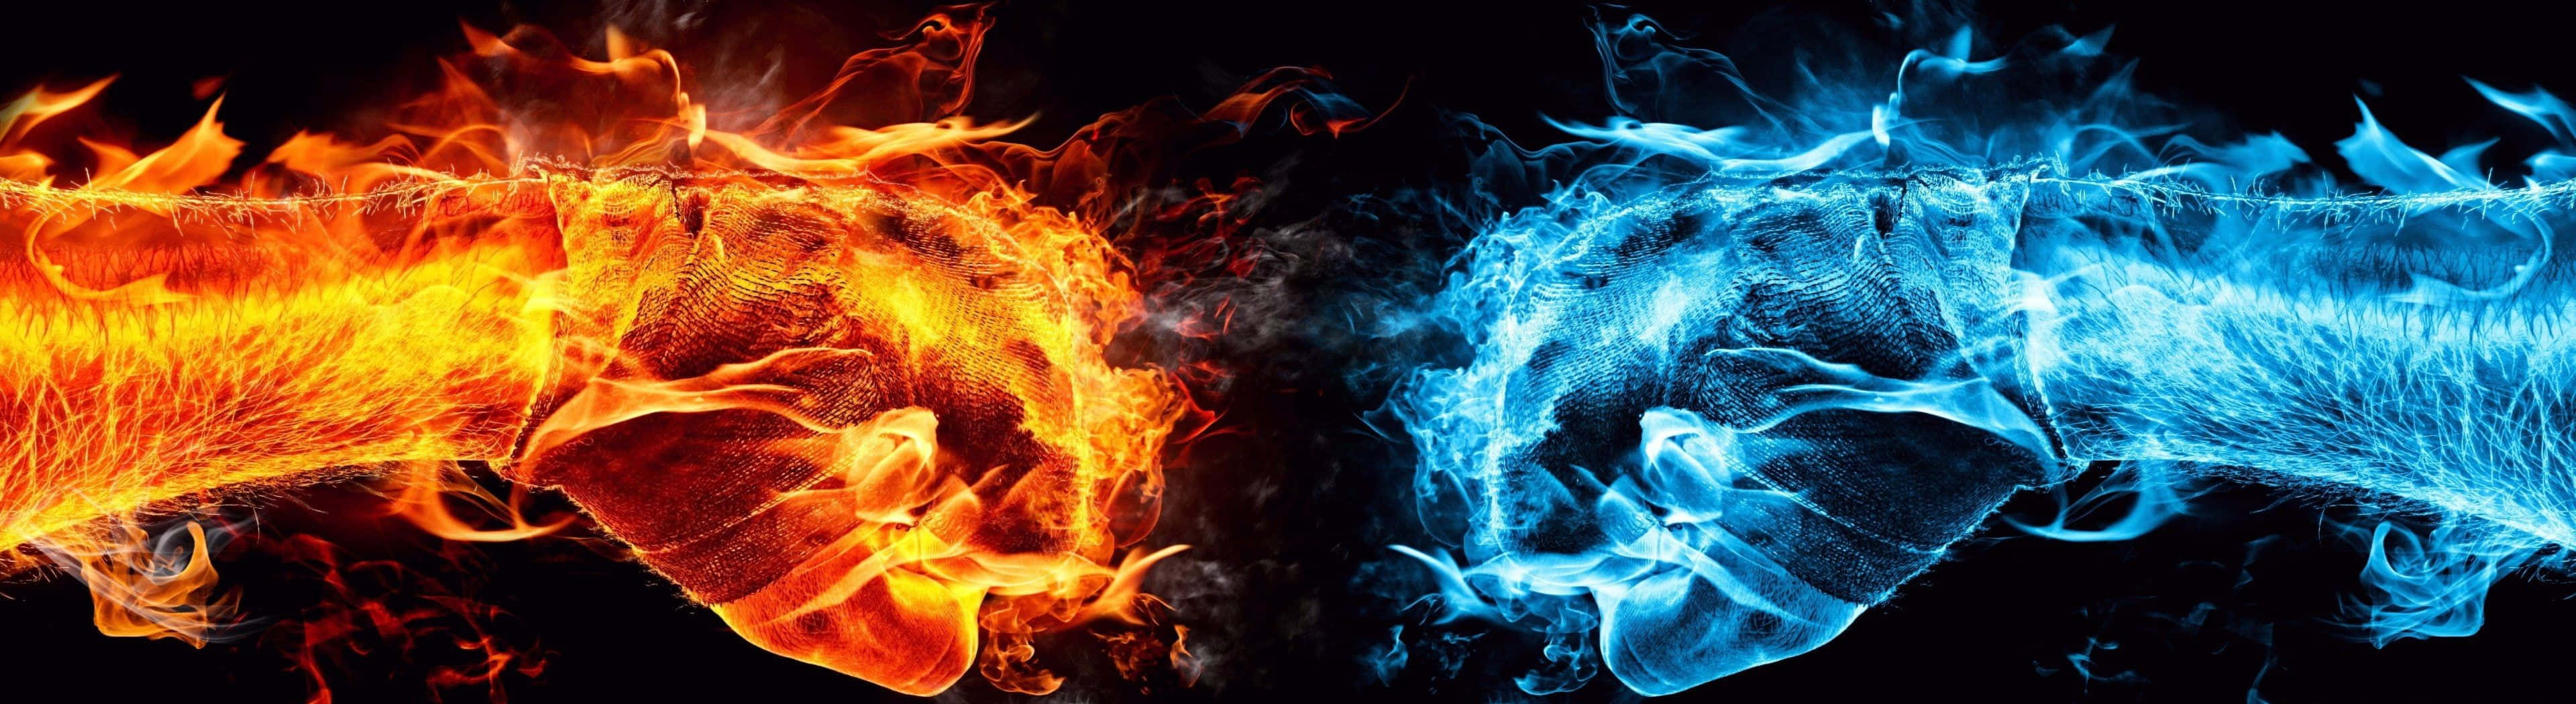 Red and Blue Flames Dance Together in Harmony Wallpaper